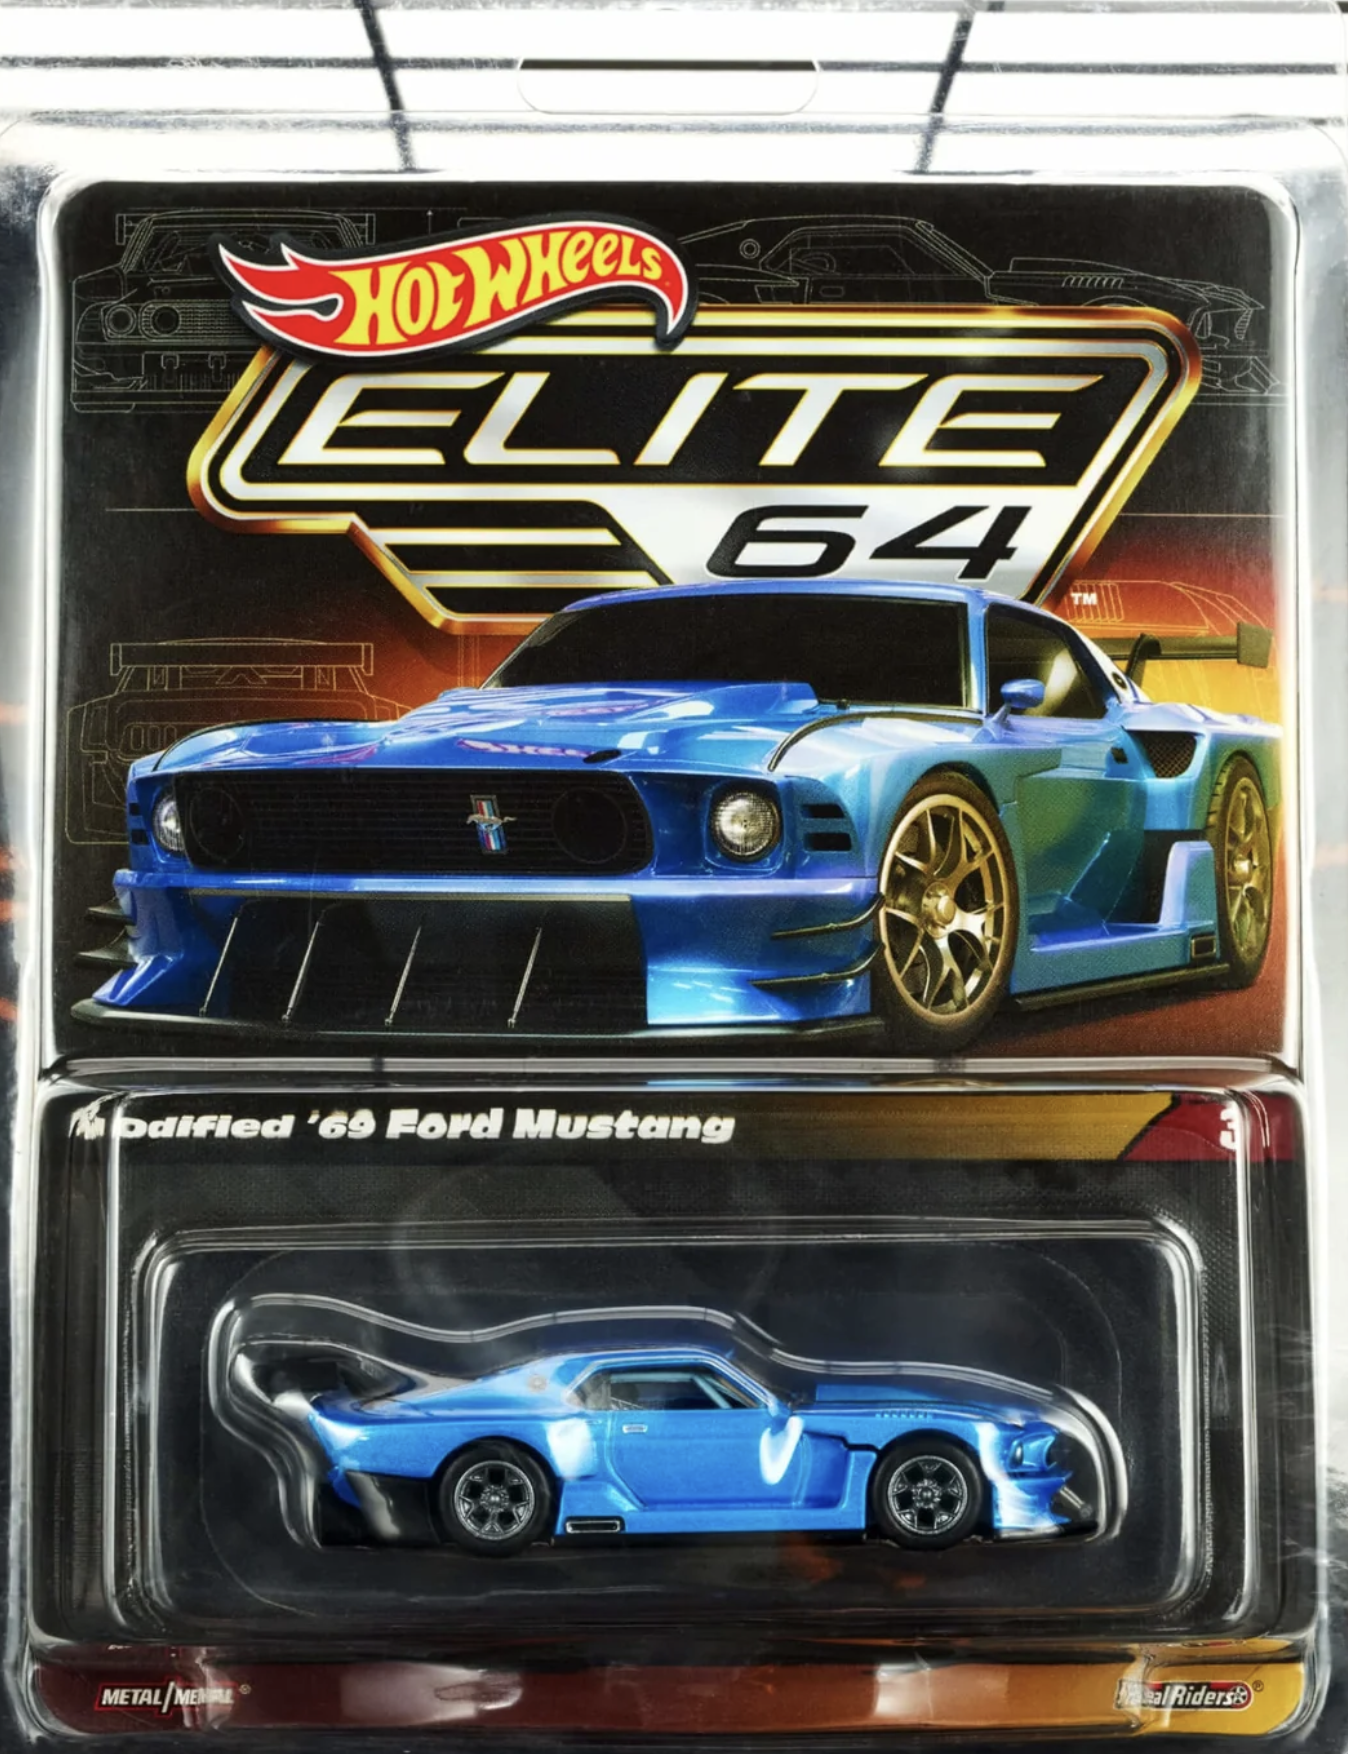 Hot Wheels Redline Club Elite 64 Modified '69 Ford Mustang